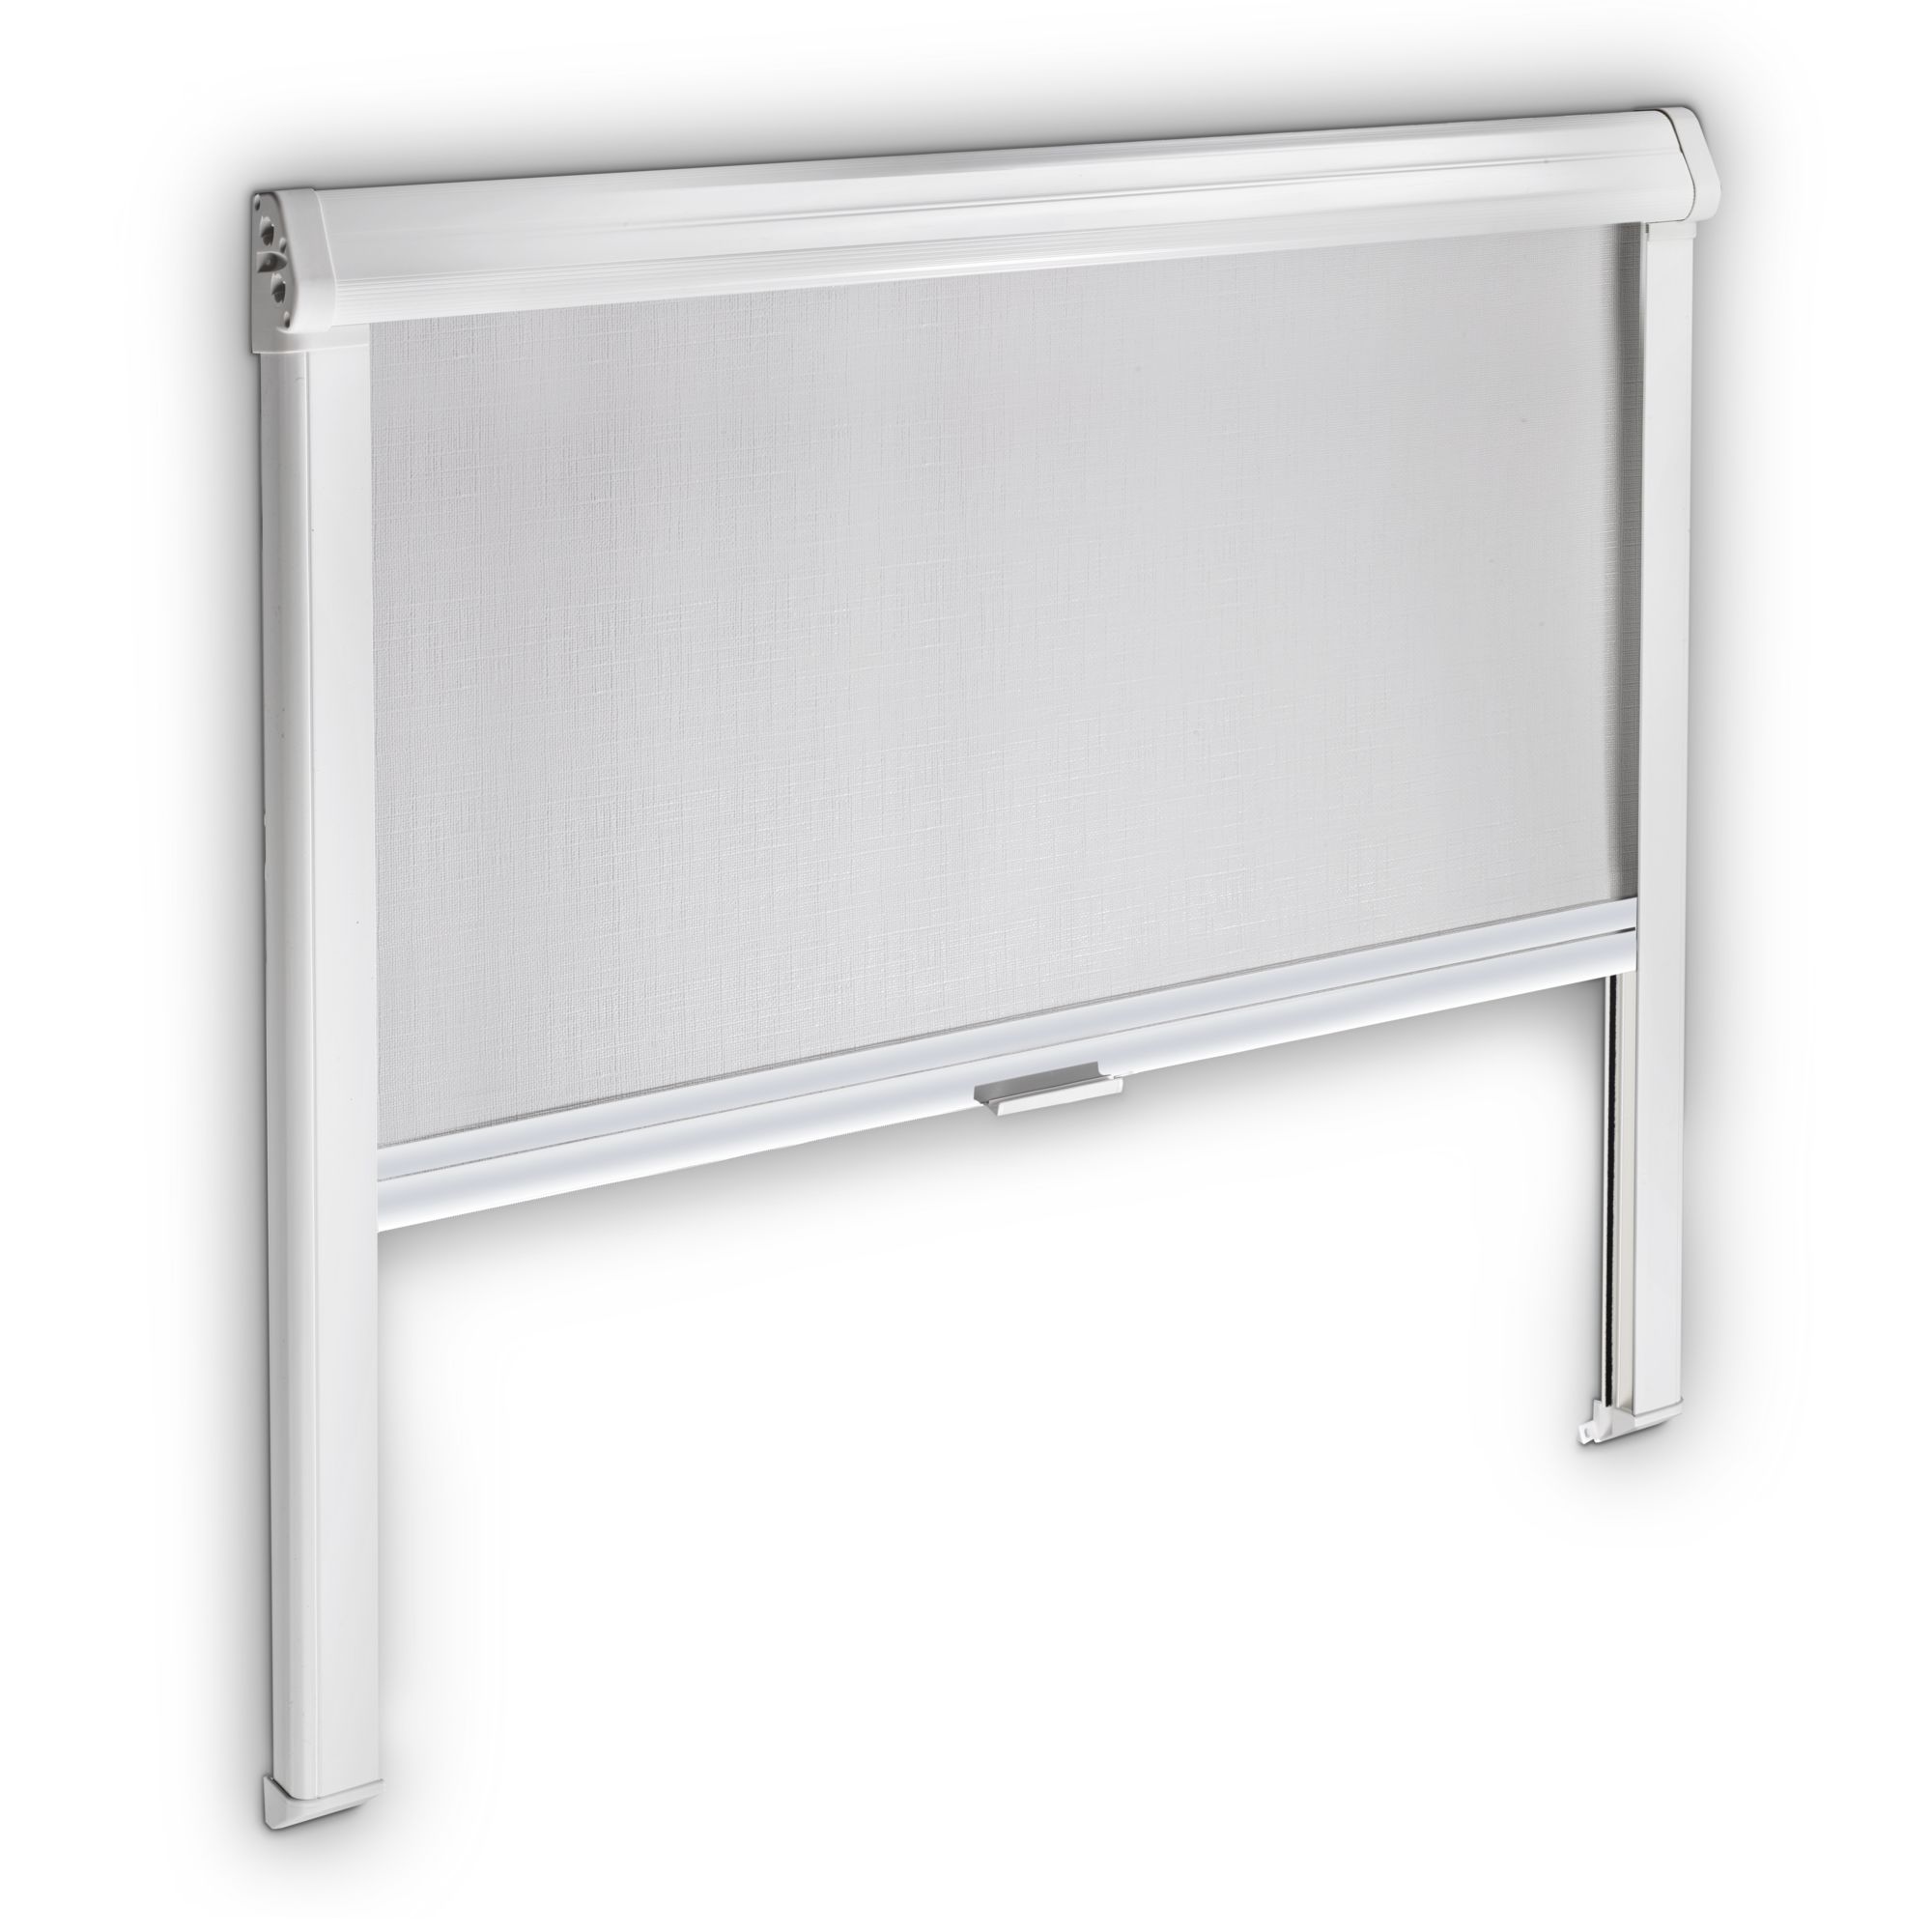 Dometic Black-Out Roller Blind 3000, 1160 x 710 mm, grey-white